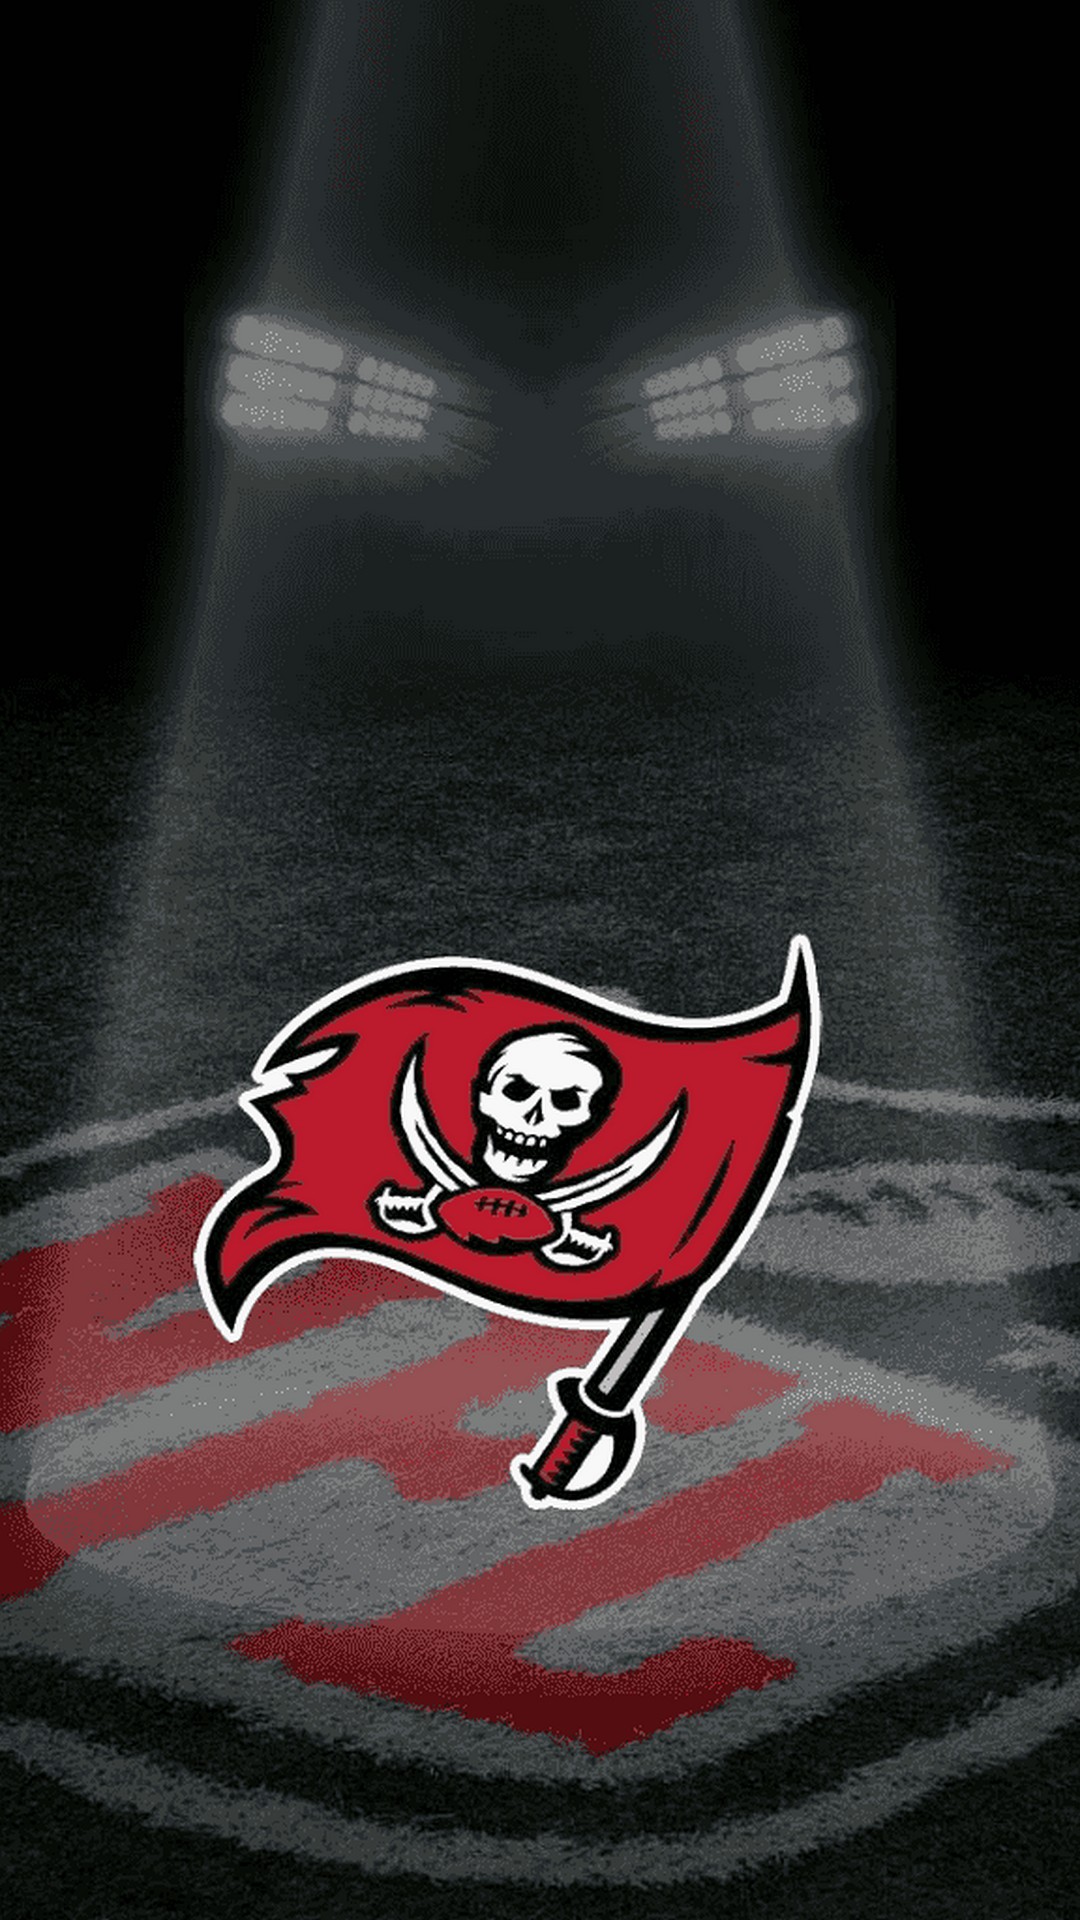 Tampa Bay Buccaneers iPhone 8 Wallpaper With high-resolution 1080X1920 pixel. You can use this wallpaper for your Mac or Windows Desktop Background, iPhone, Android or Tablet and another Smartphone device